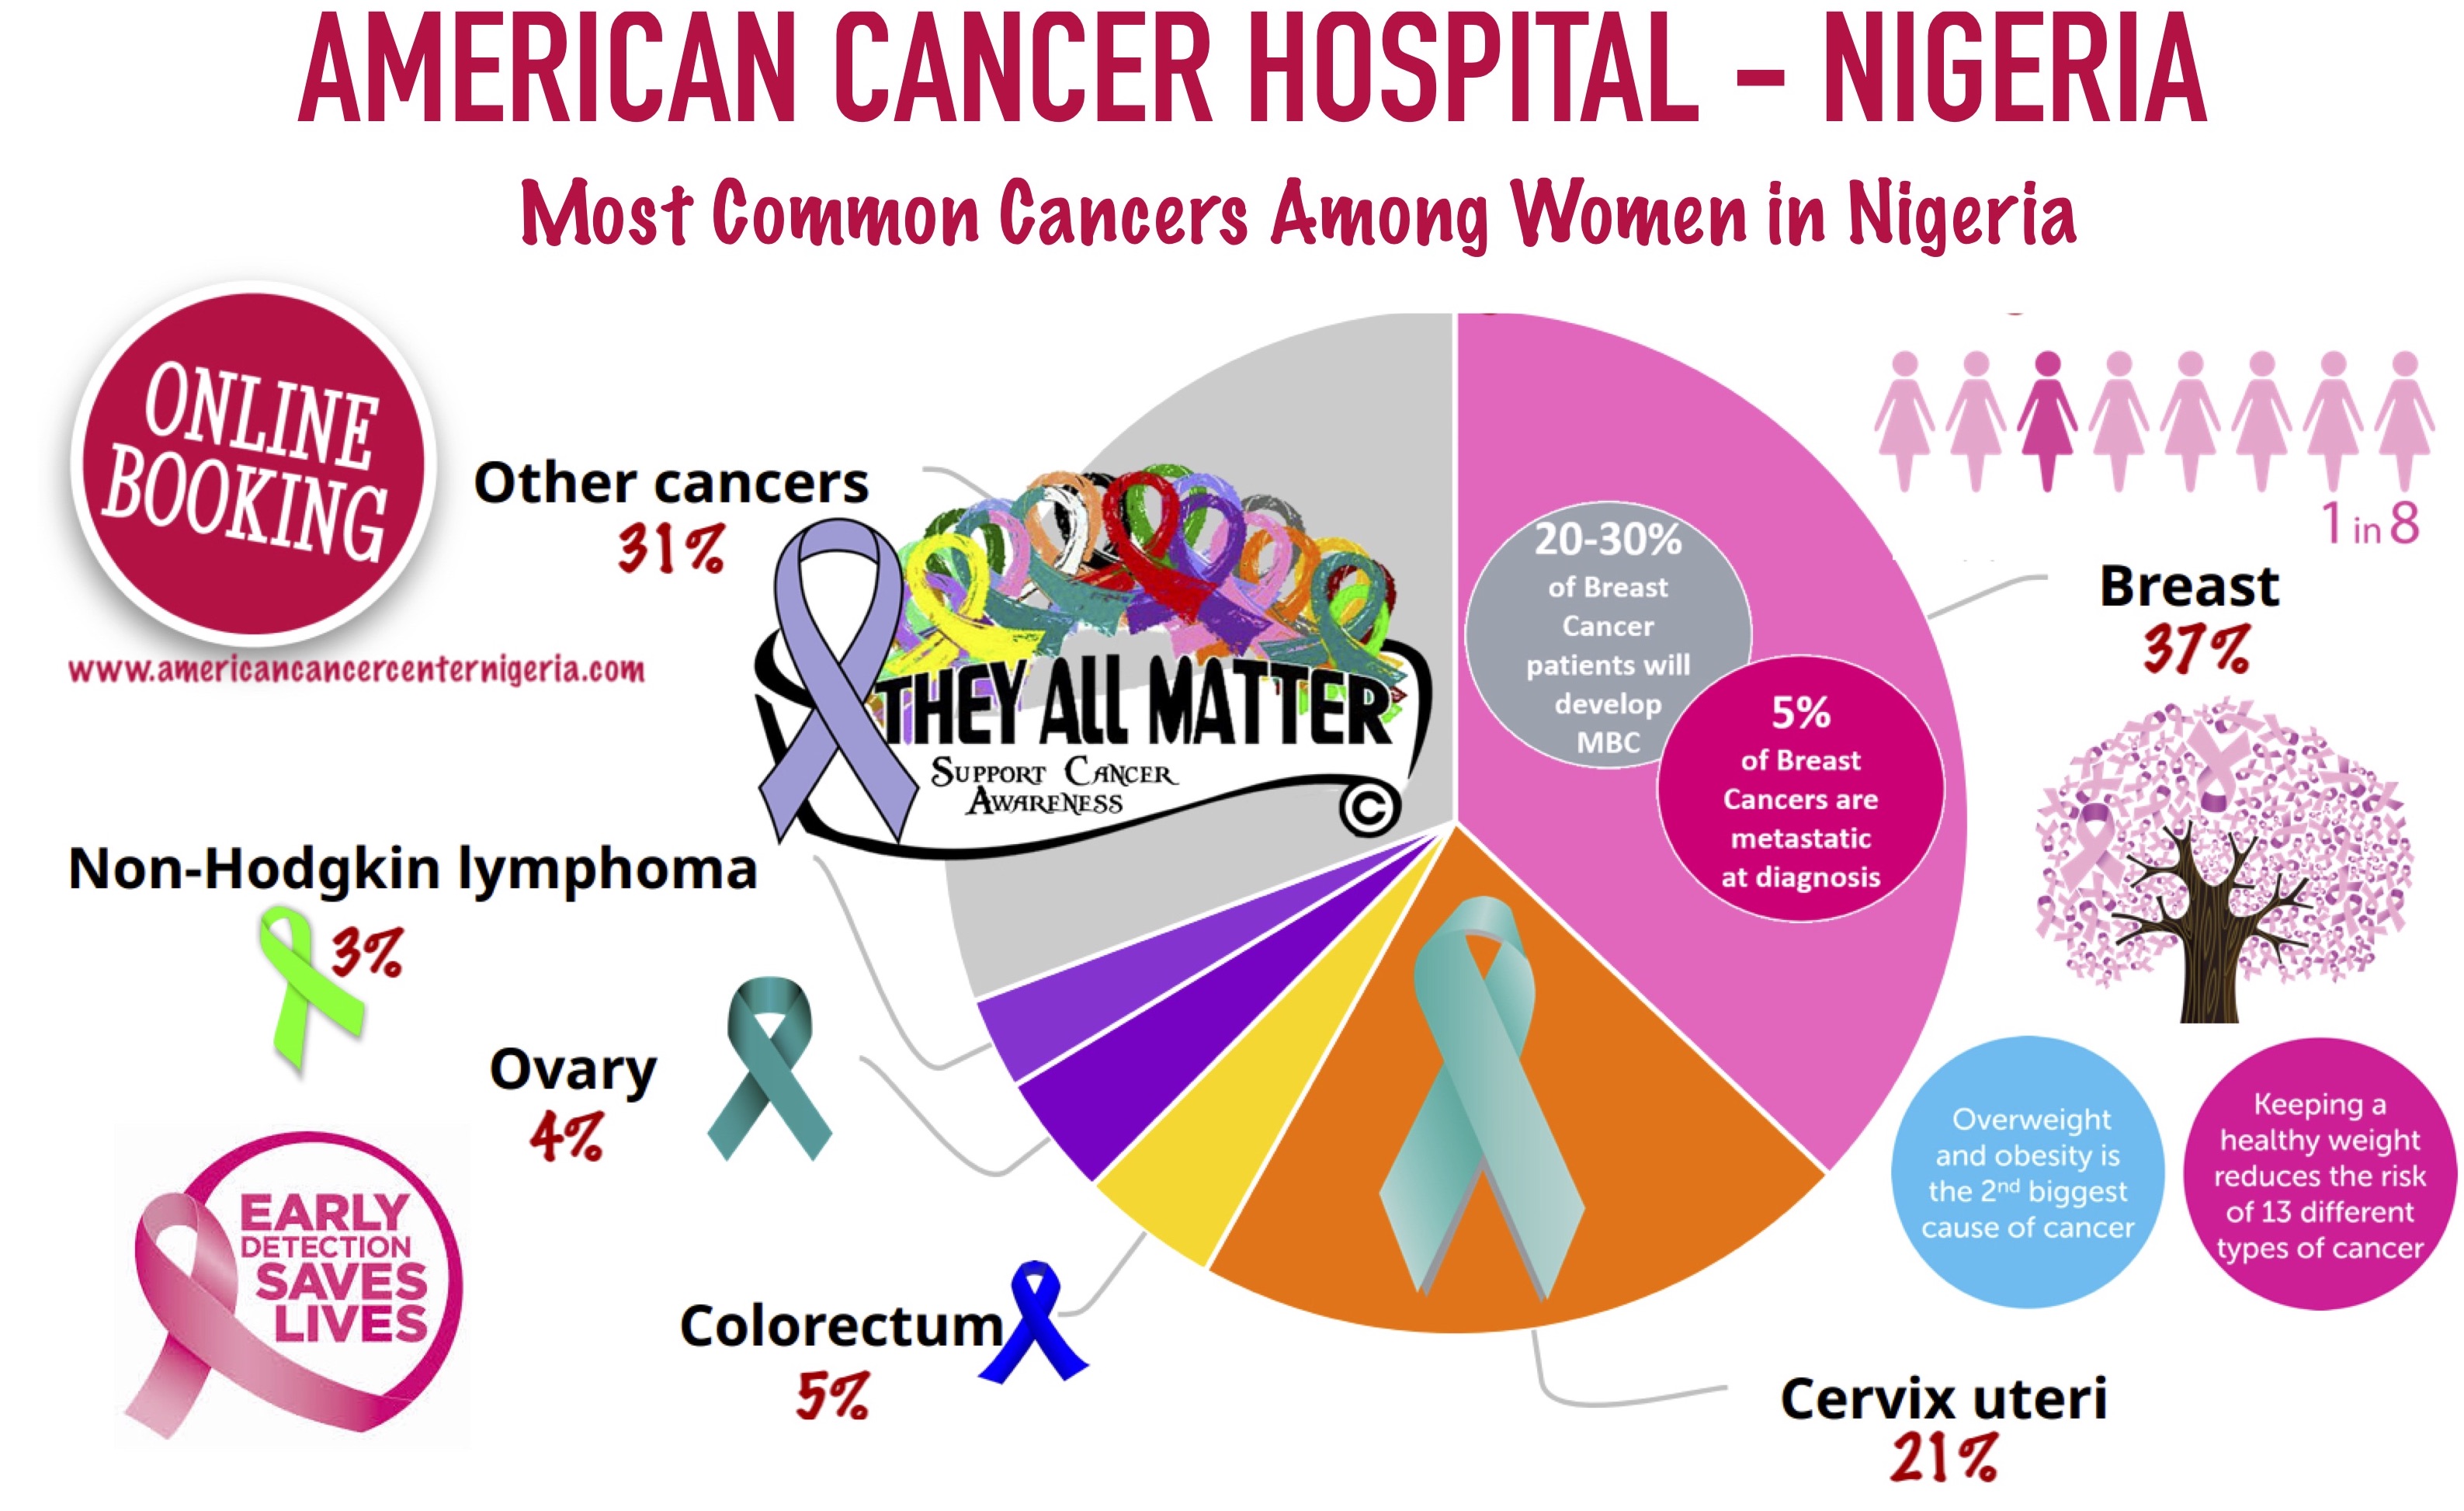 MOST COMMON CANCERS IN WOMEN IN NIGERIA